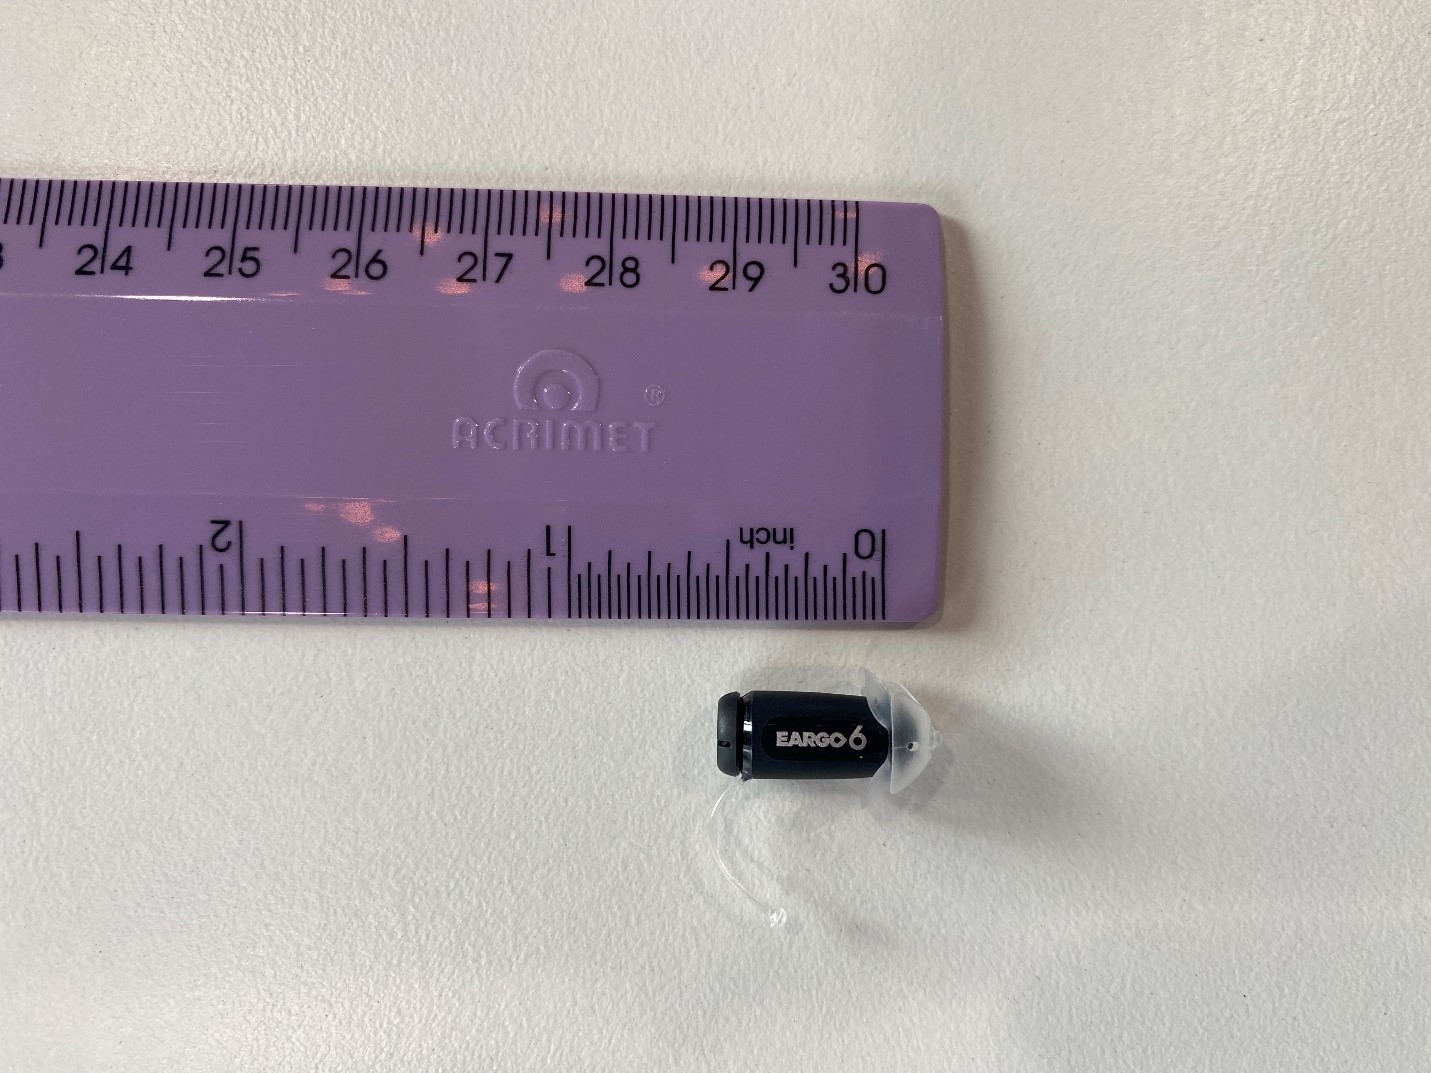 Eargo hearing aid size measured